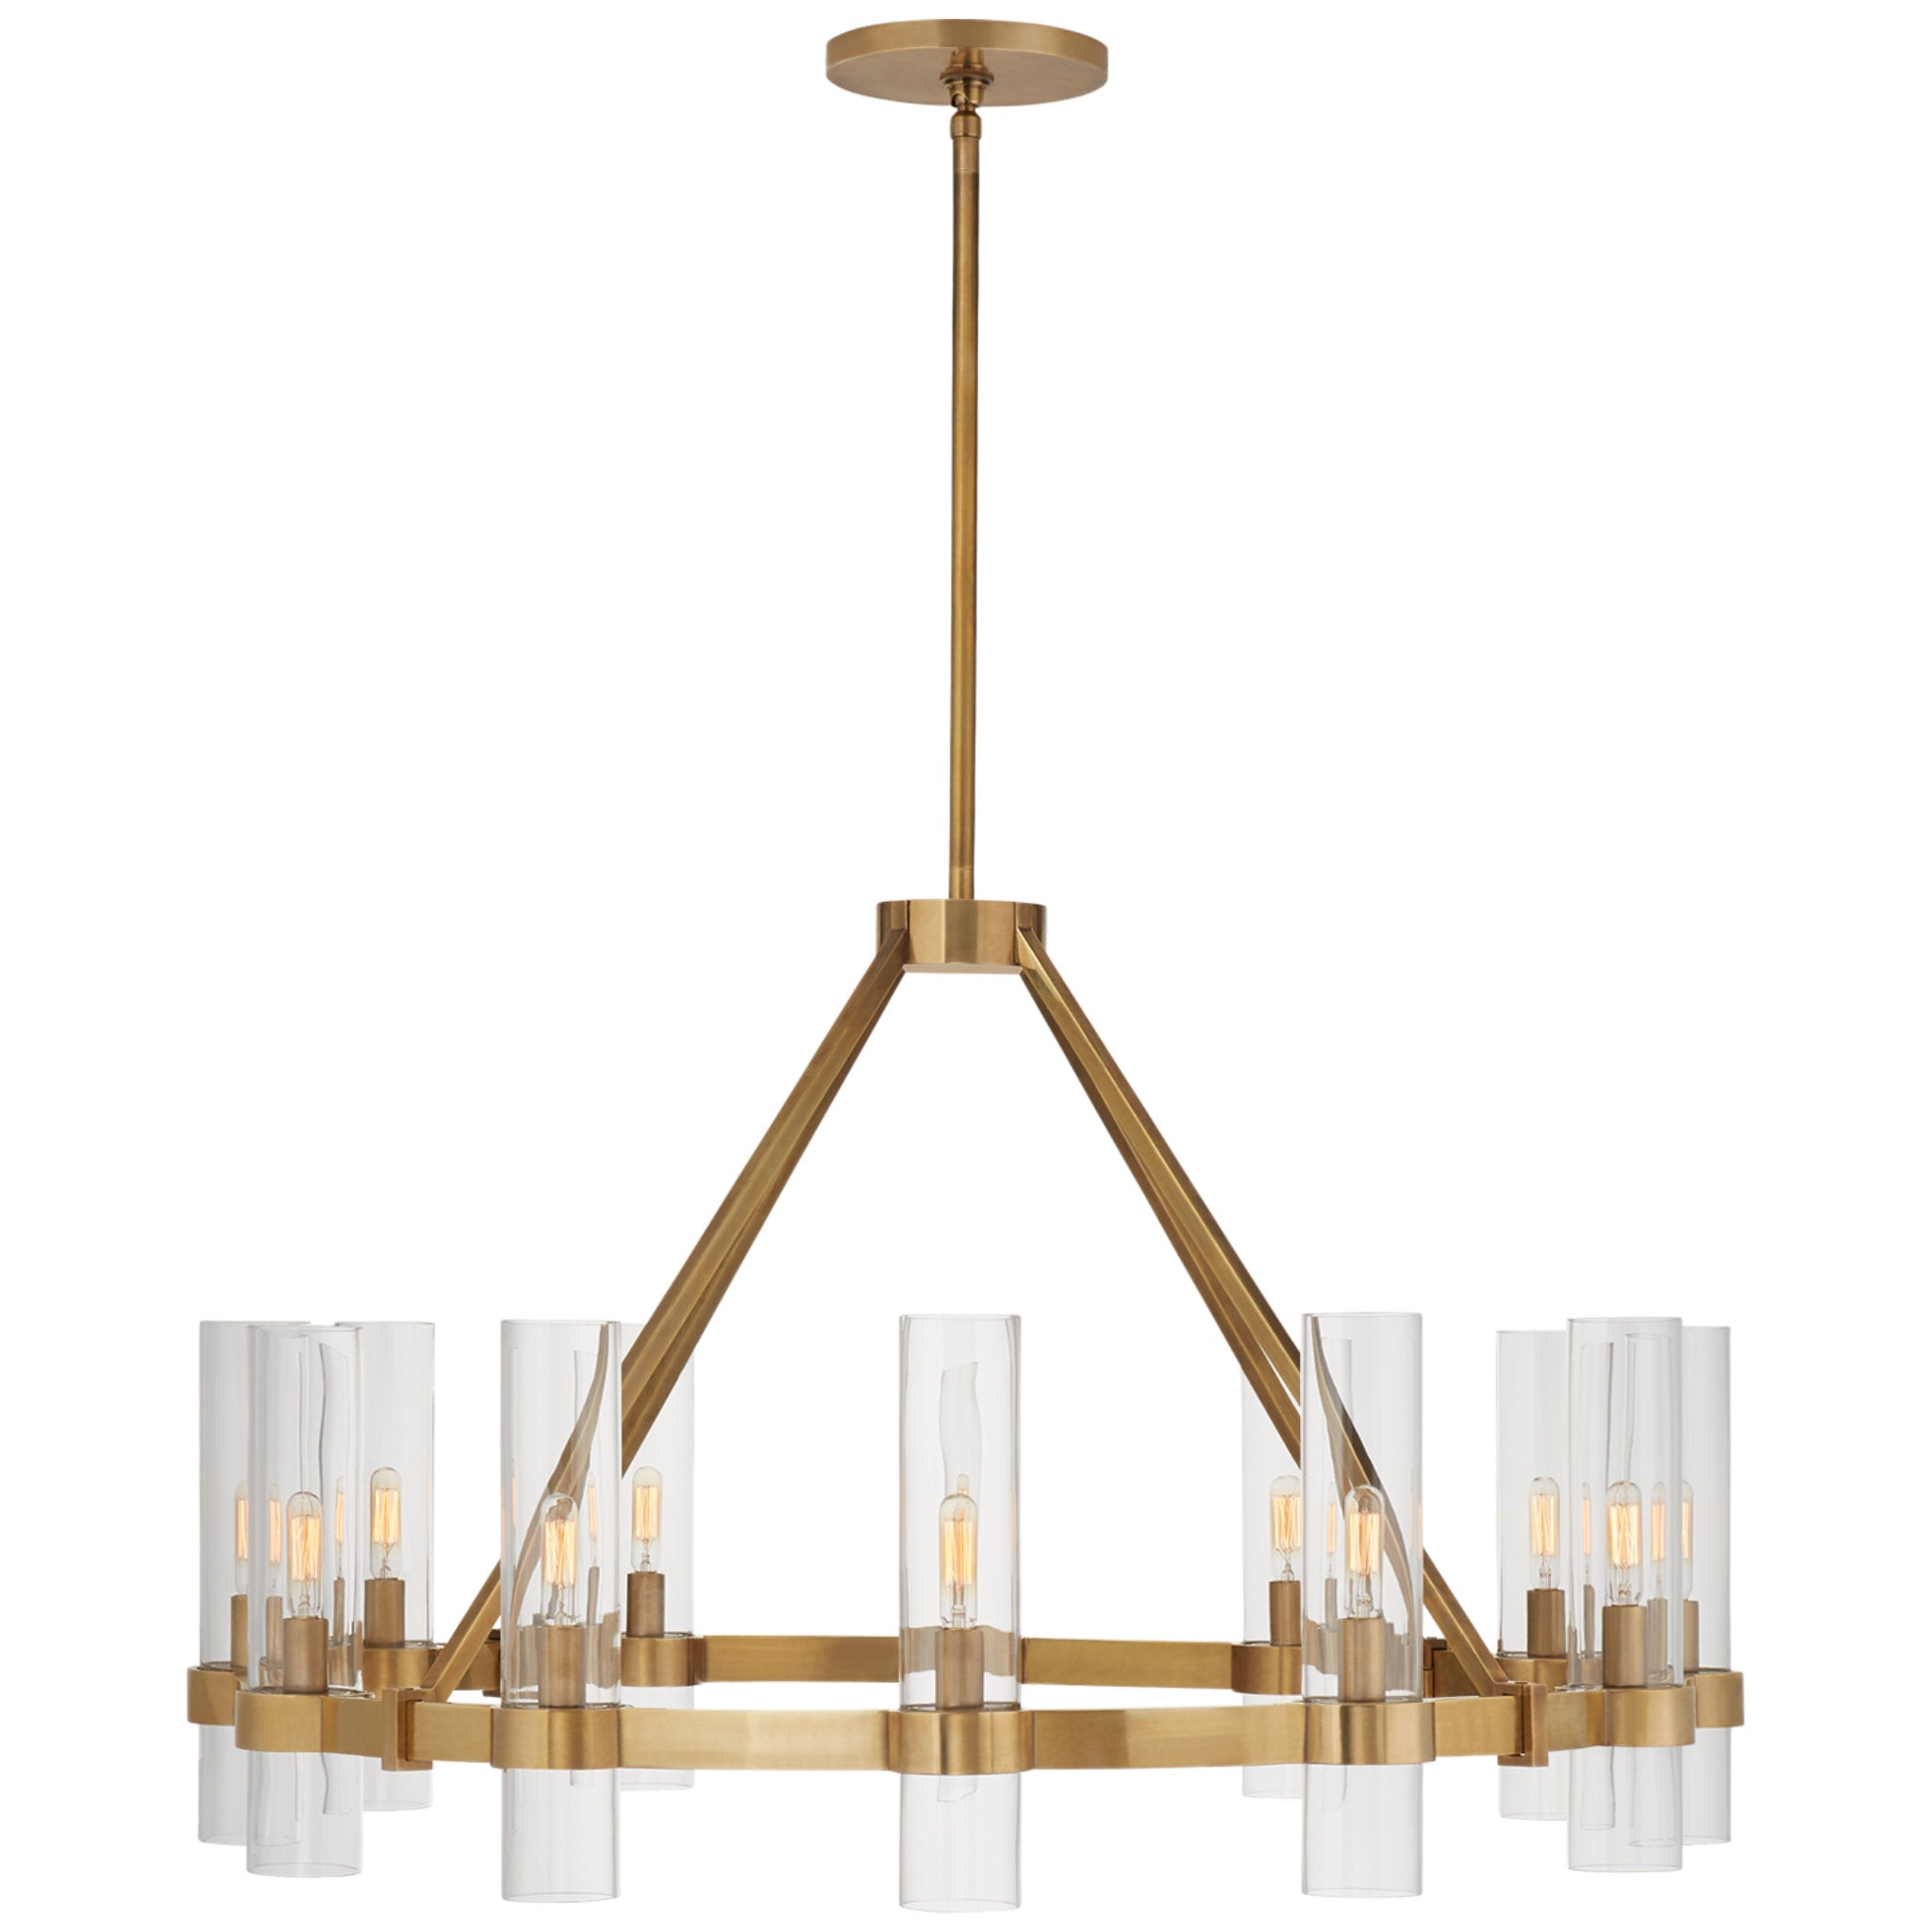 Ian K. Fowler Presidio Medium Chandelier in Hand-Rubbed Antique Brass with Clear Glass